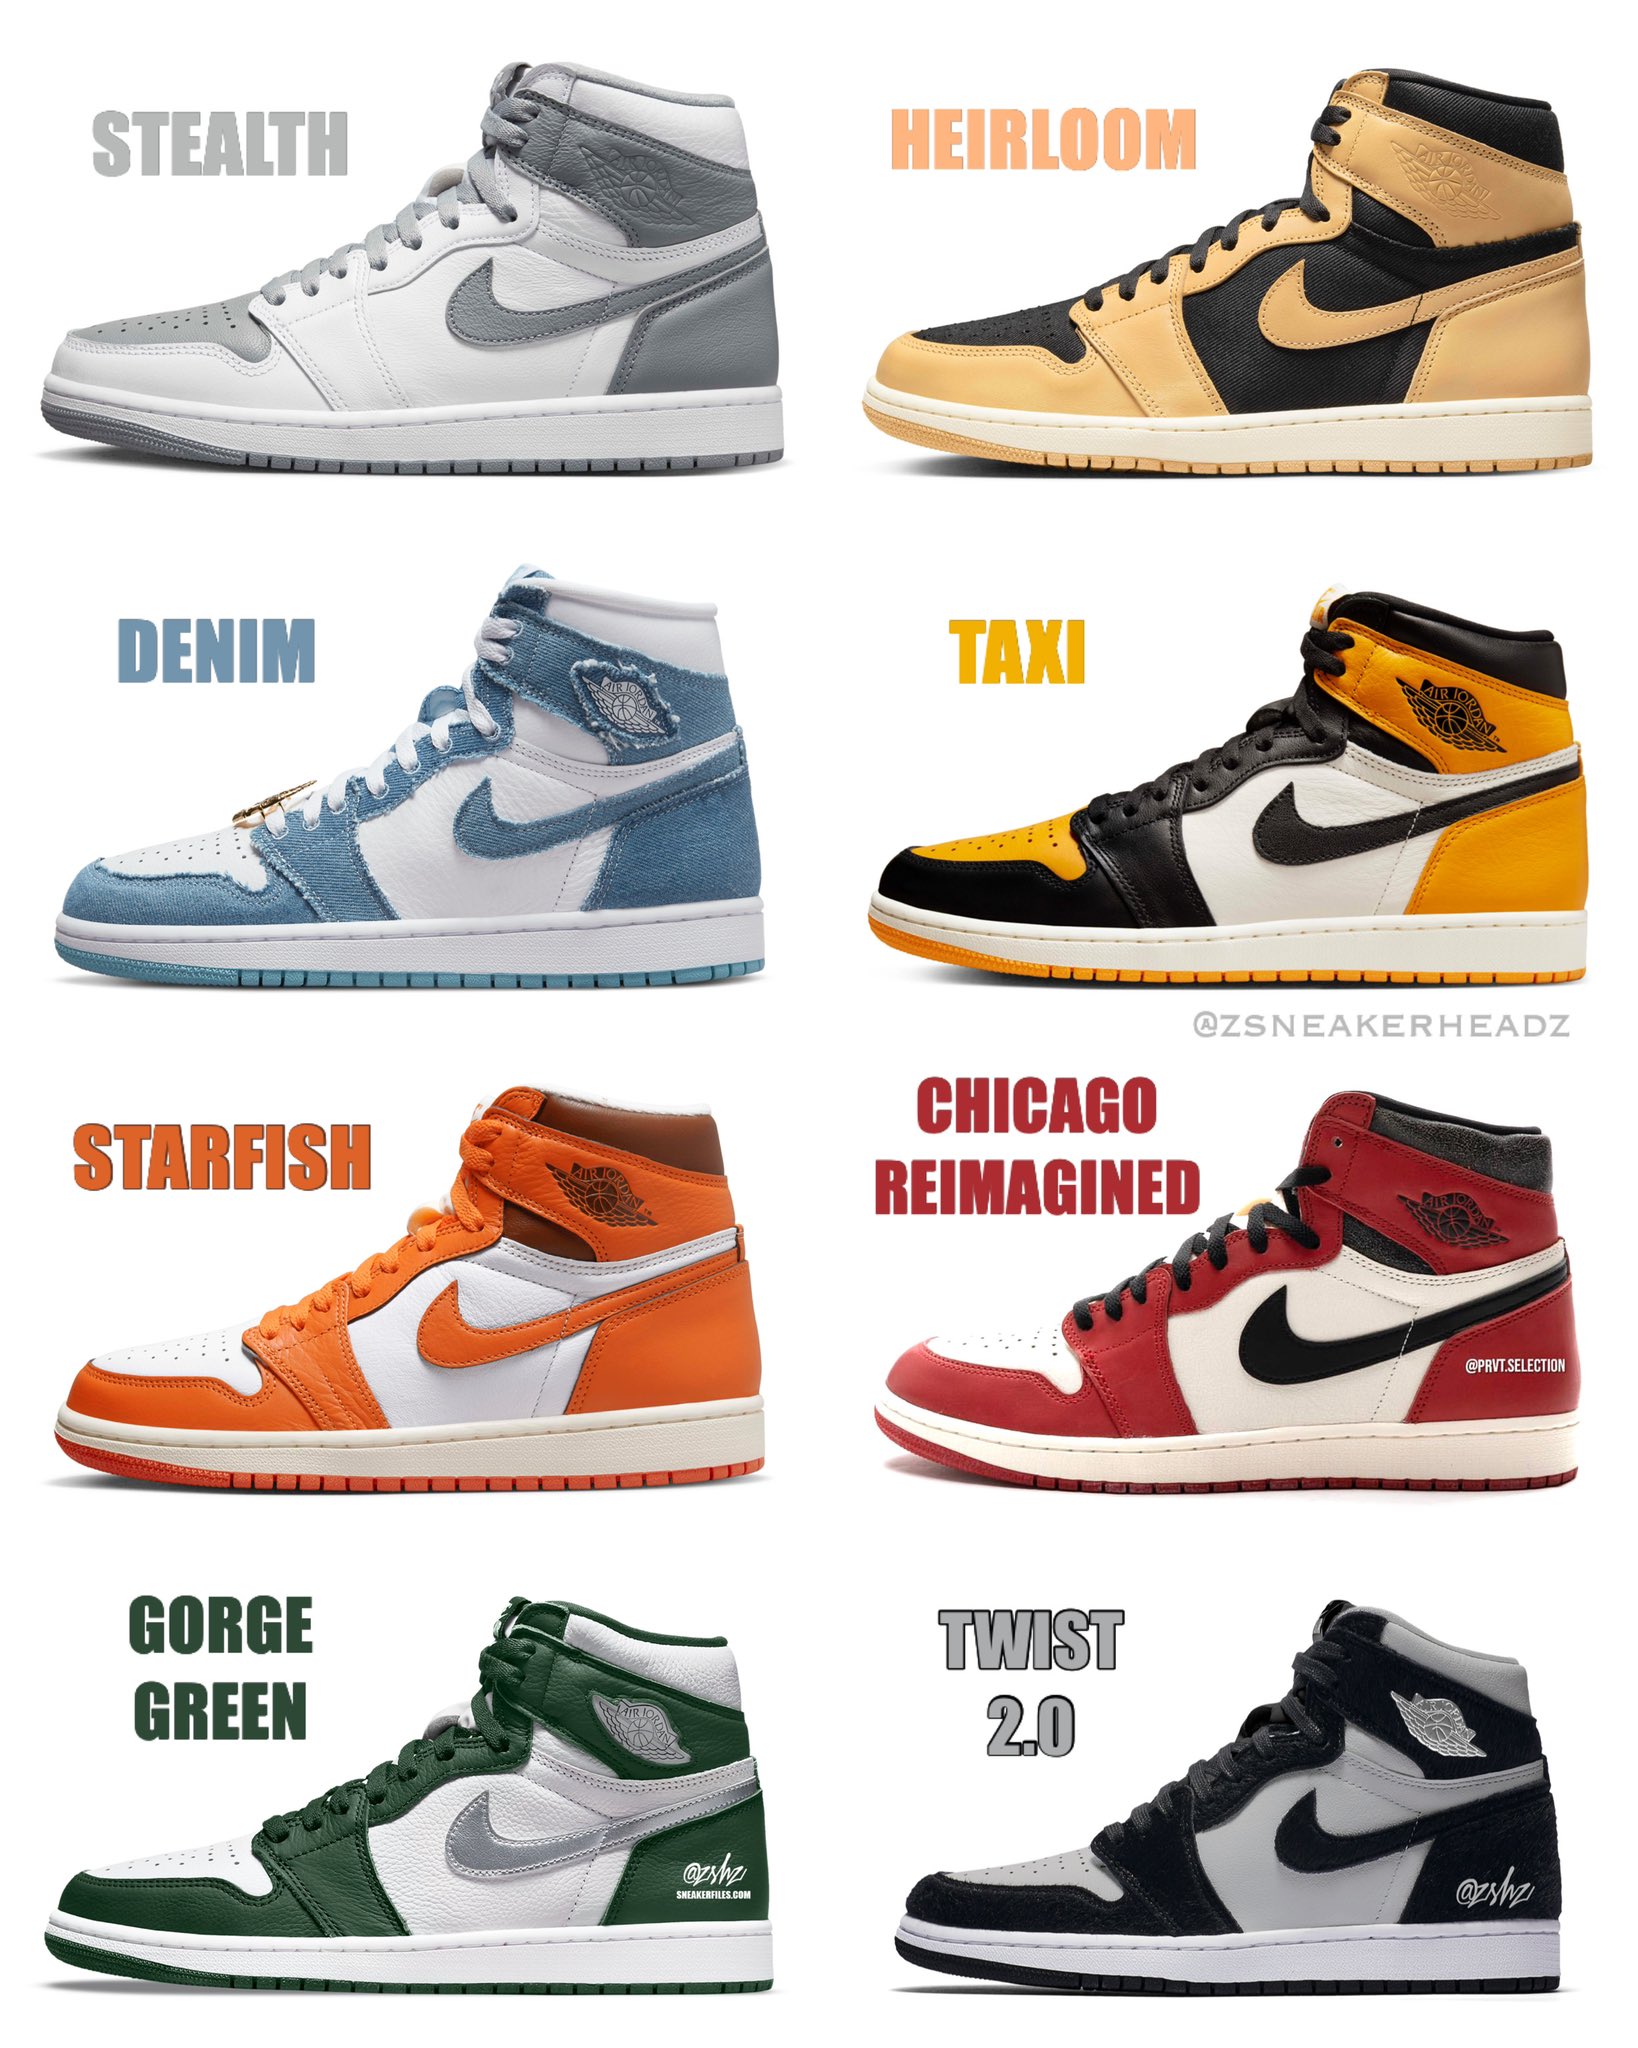 Blank Matematik Miniature zSneakerHeadz on Twitter: "Which upcoming Air Jordan 1 High OG colorway(s)  will you be going after⁉️🤔 https://t.co/SGc6aZipYx" / Twitter